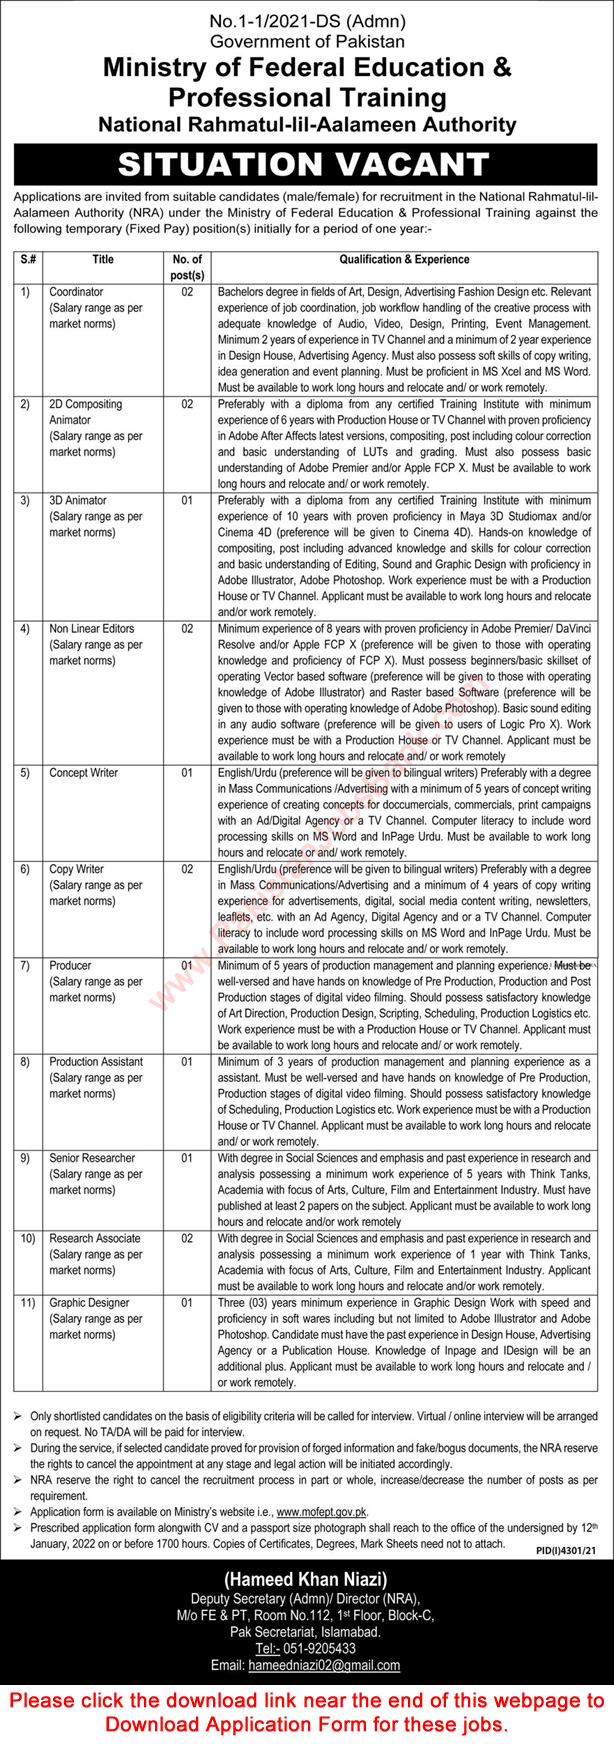 Ministry of Federal Education & Professional Training Jobs December 2021 / 2022 Application Form Latest